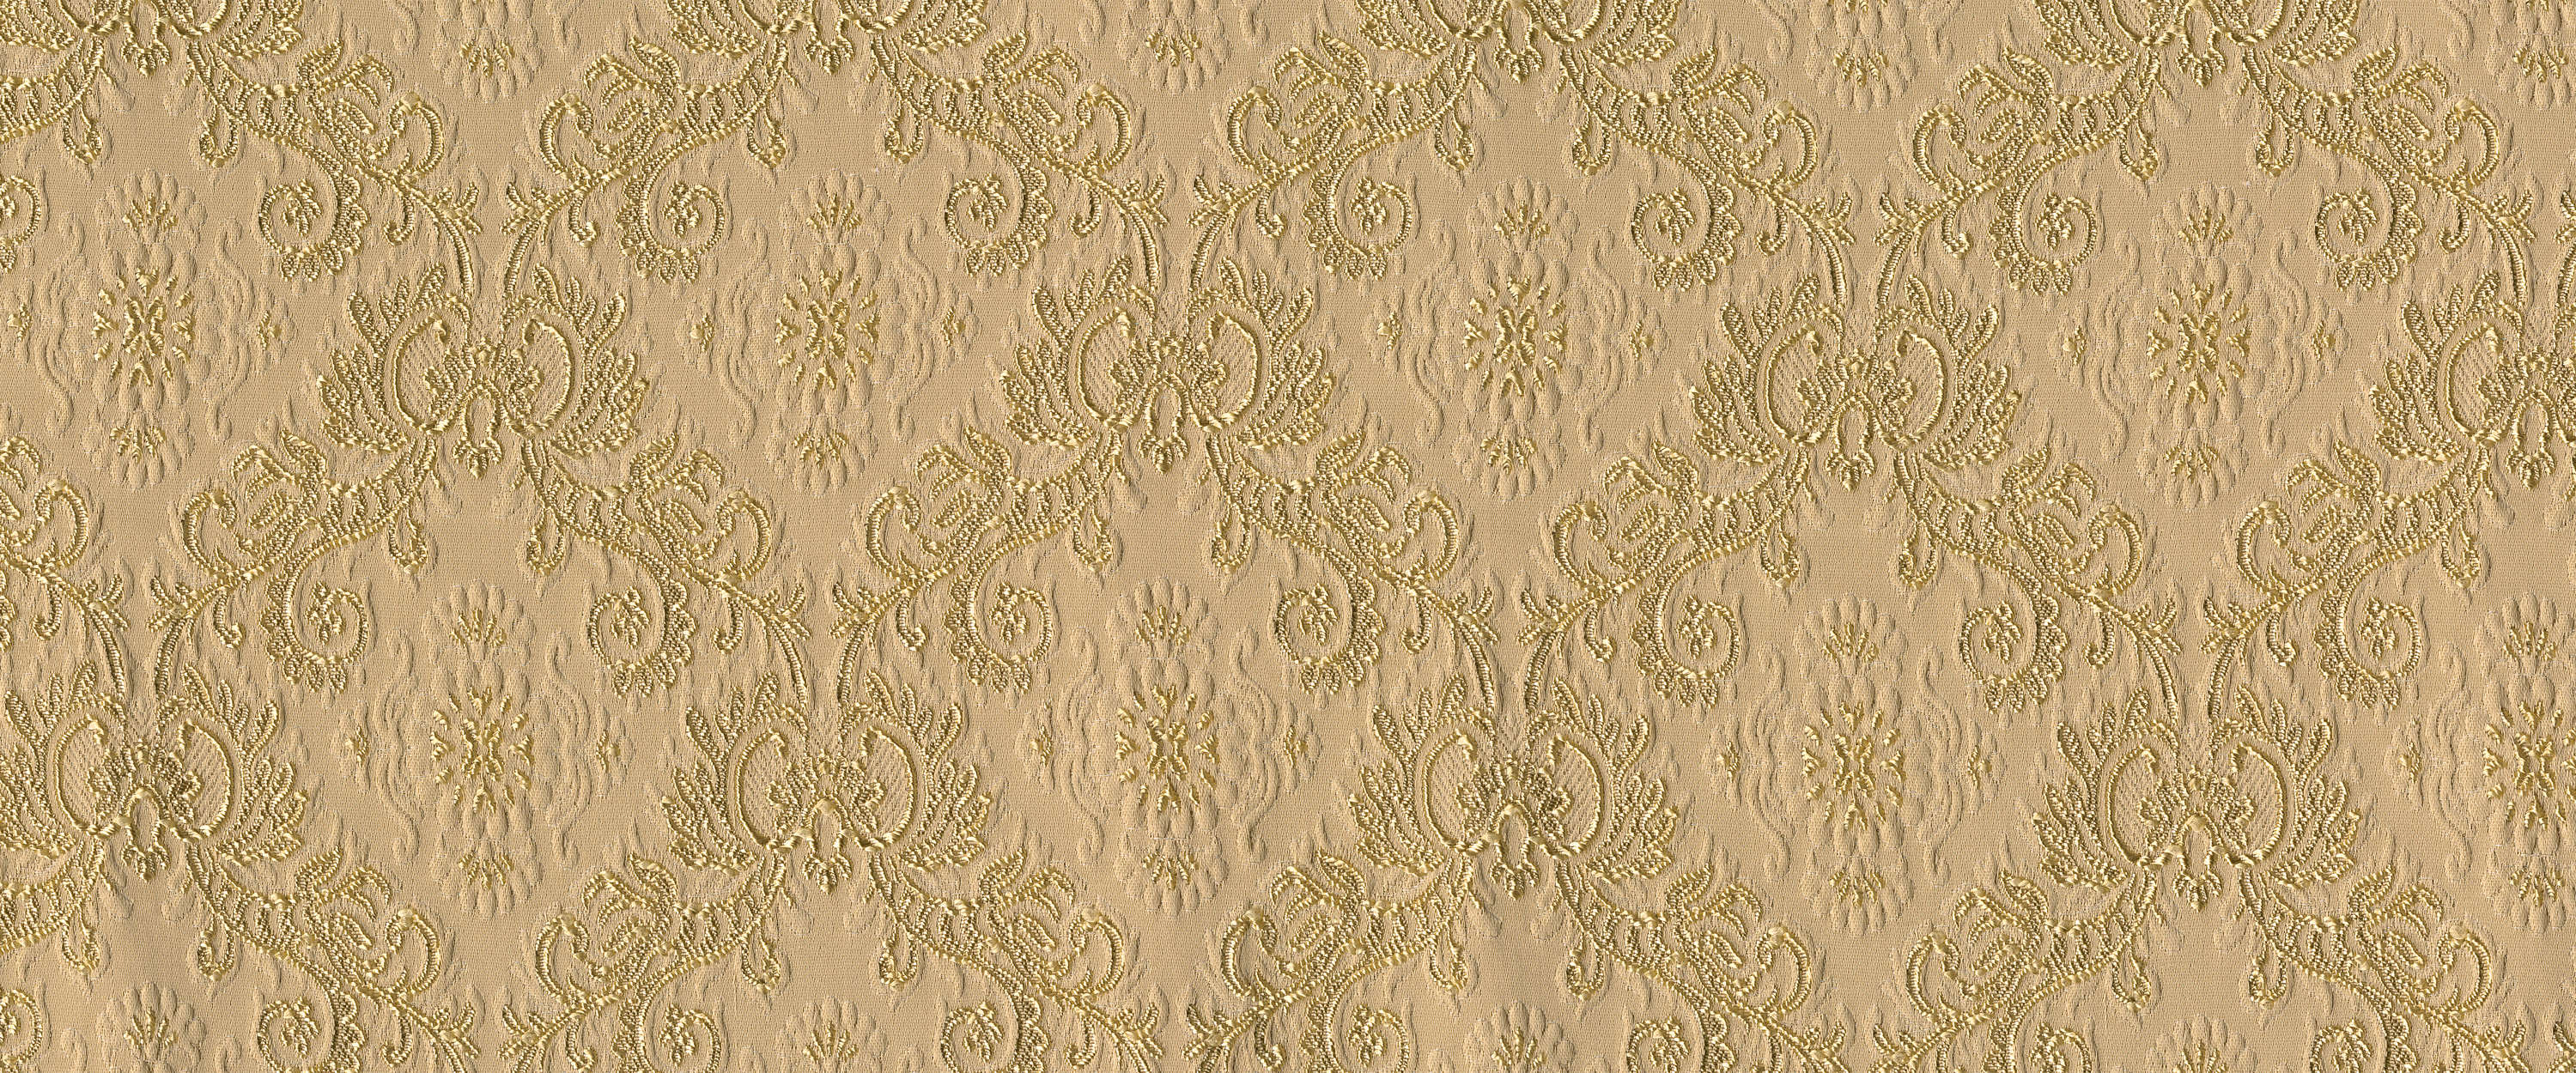             Photo wallpaper with classic gold ornaments
        